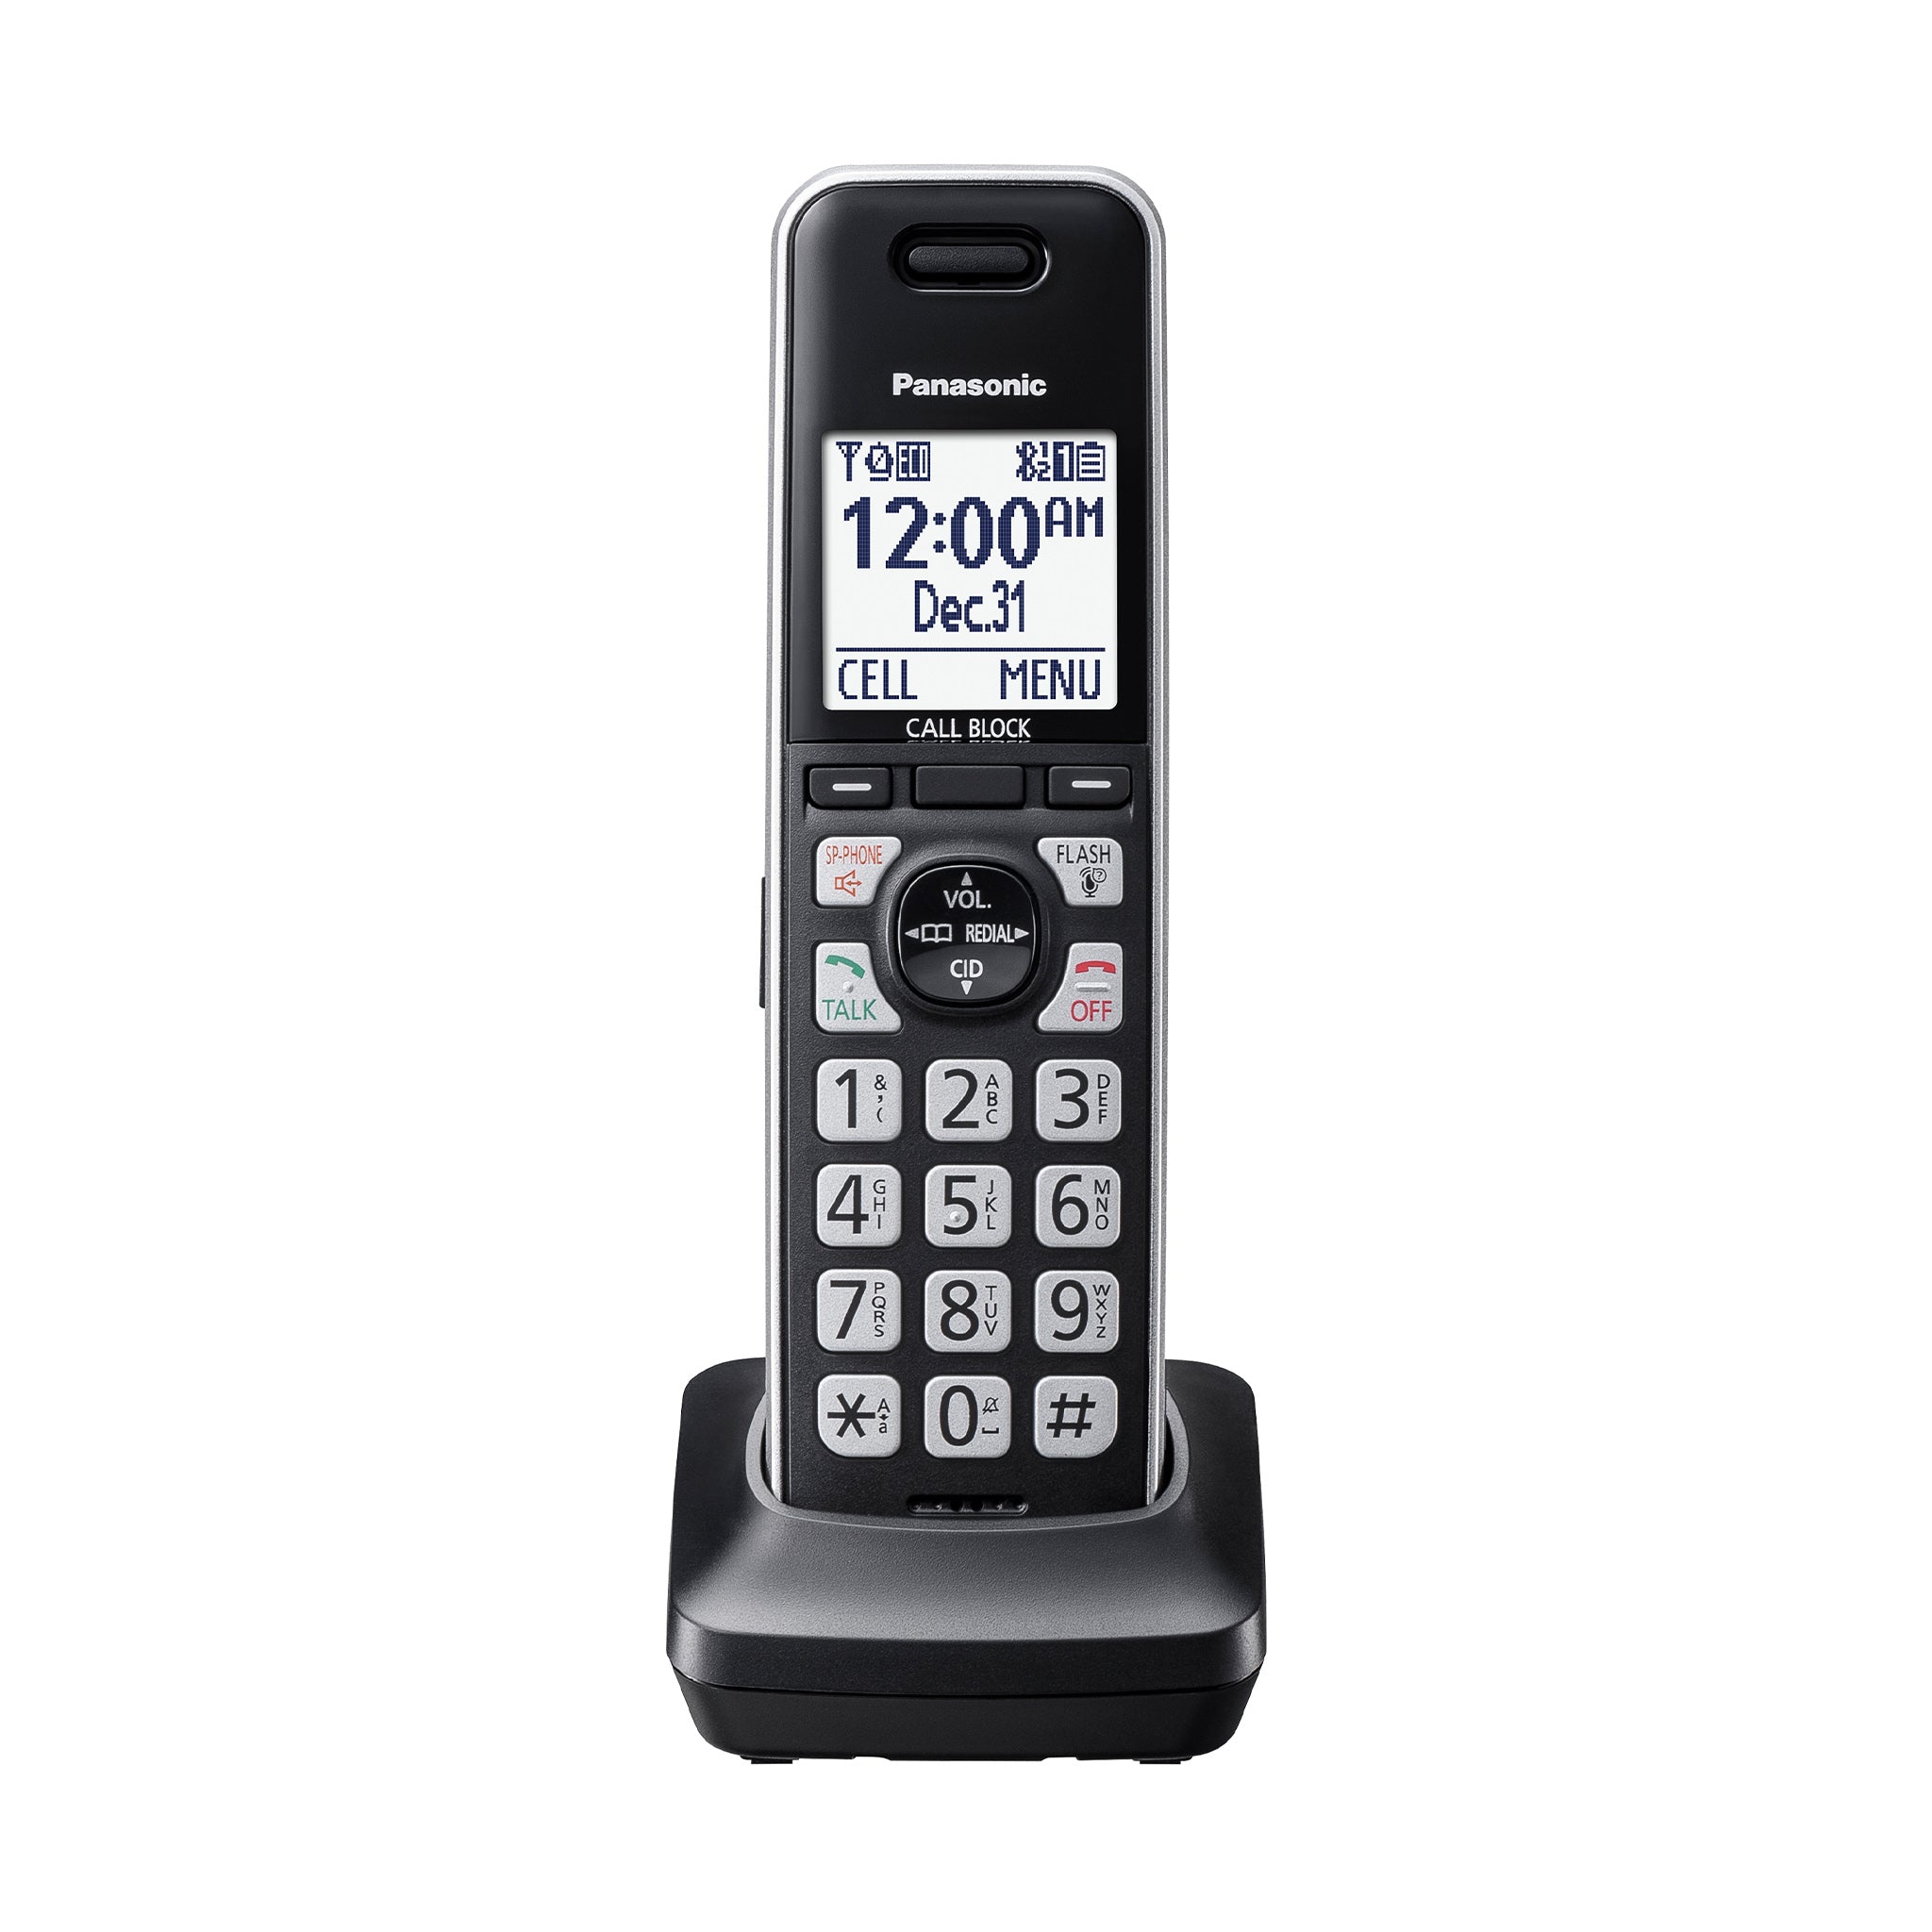 Cordless Phone Accessory Handset for TGF71x Series